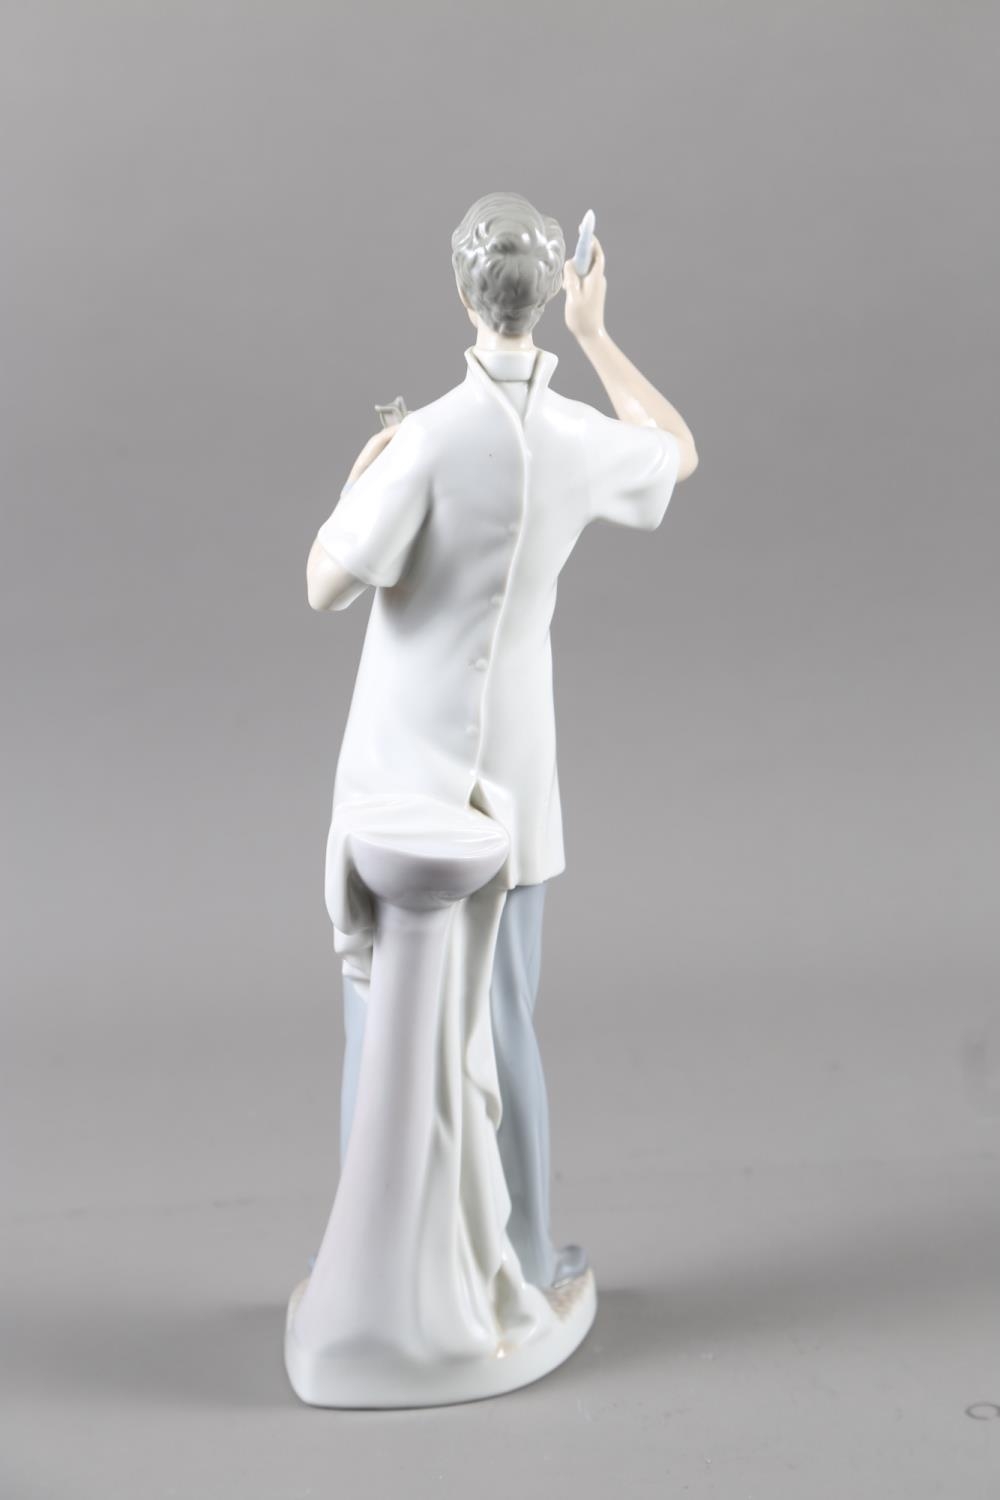 A Lladro figure, "The Dentist", 14" high - Image 2 of 4